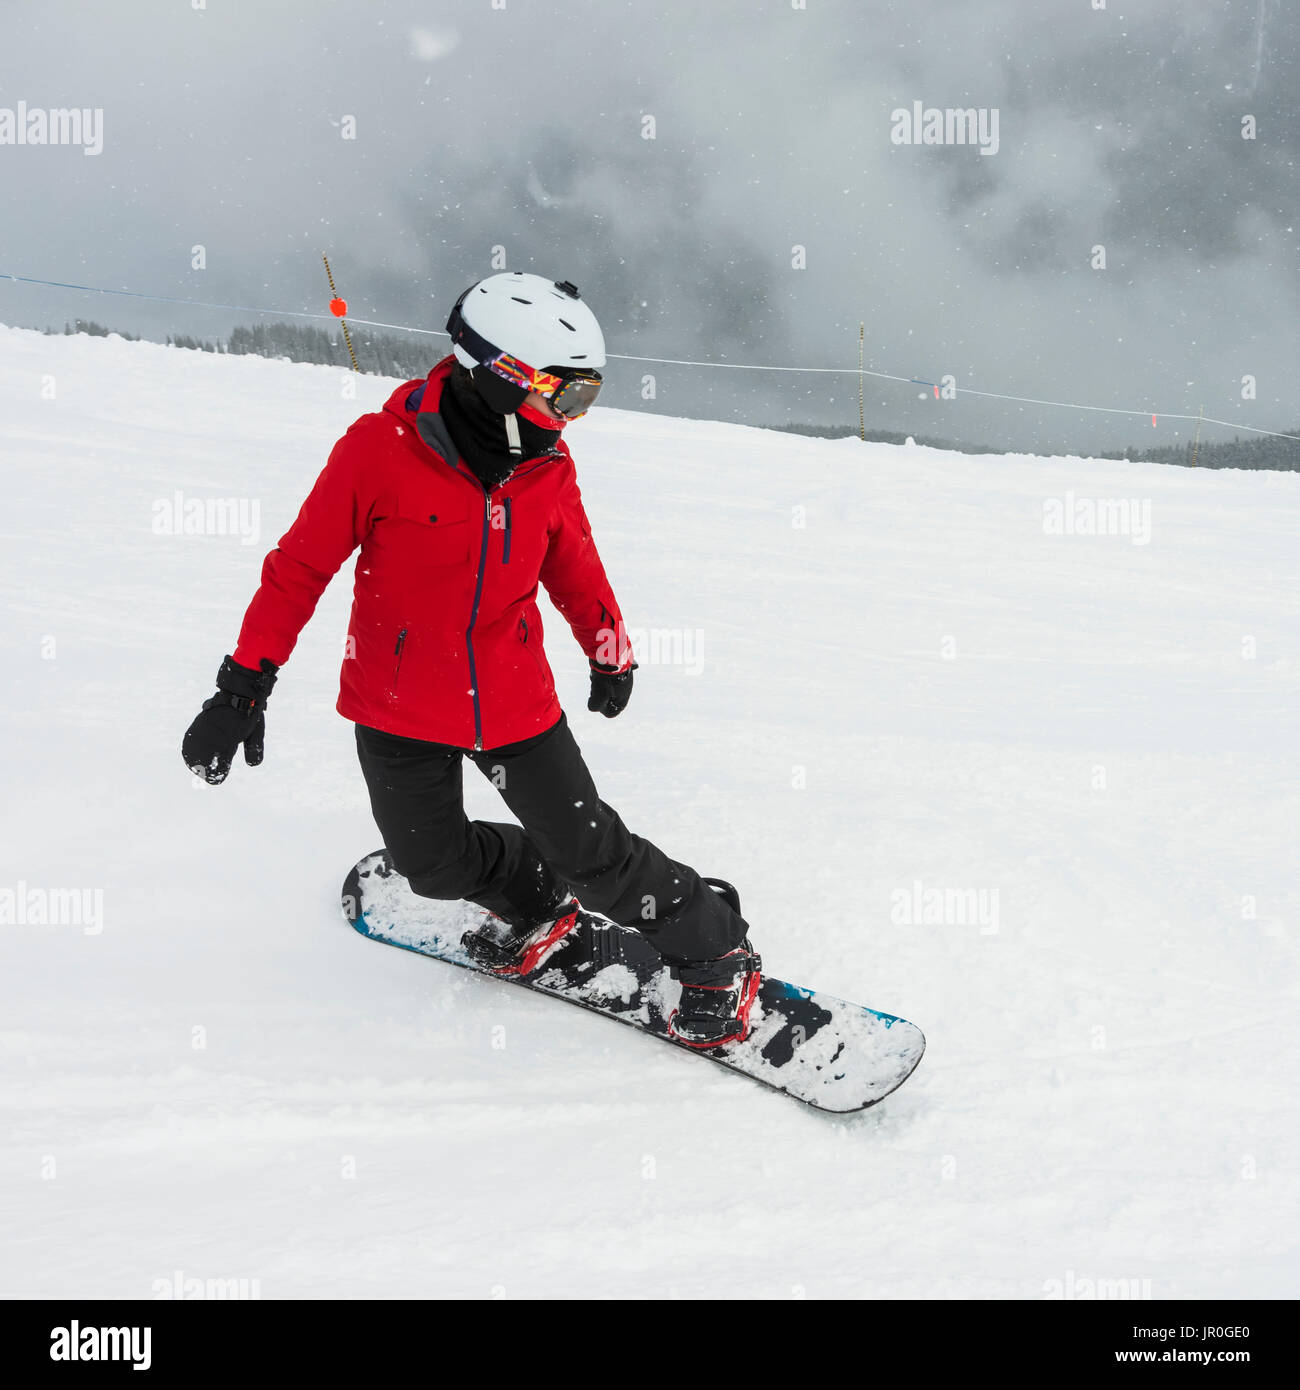 A Snowboarder In A Red Jacket Snowboarding In The Canadian Rockies; Whistler, British Columbia, Canada Stock Photo